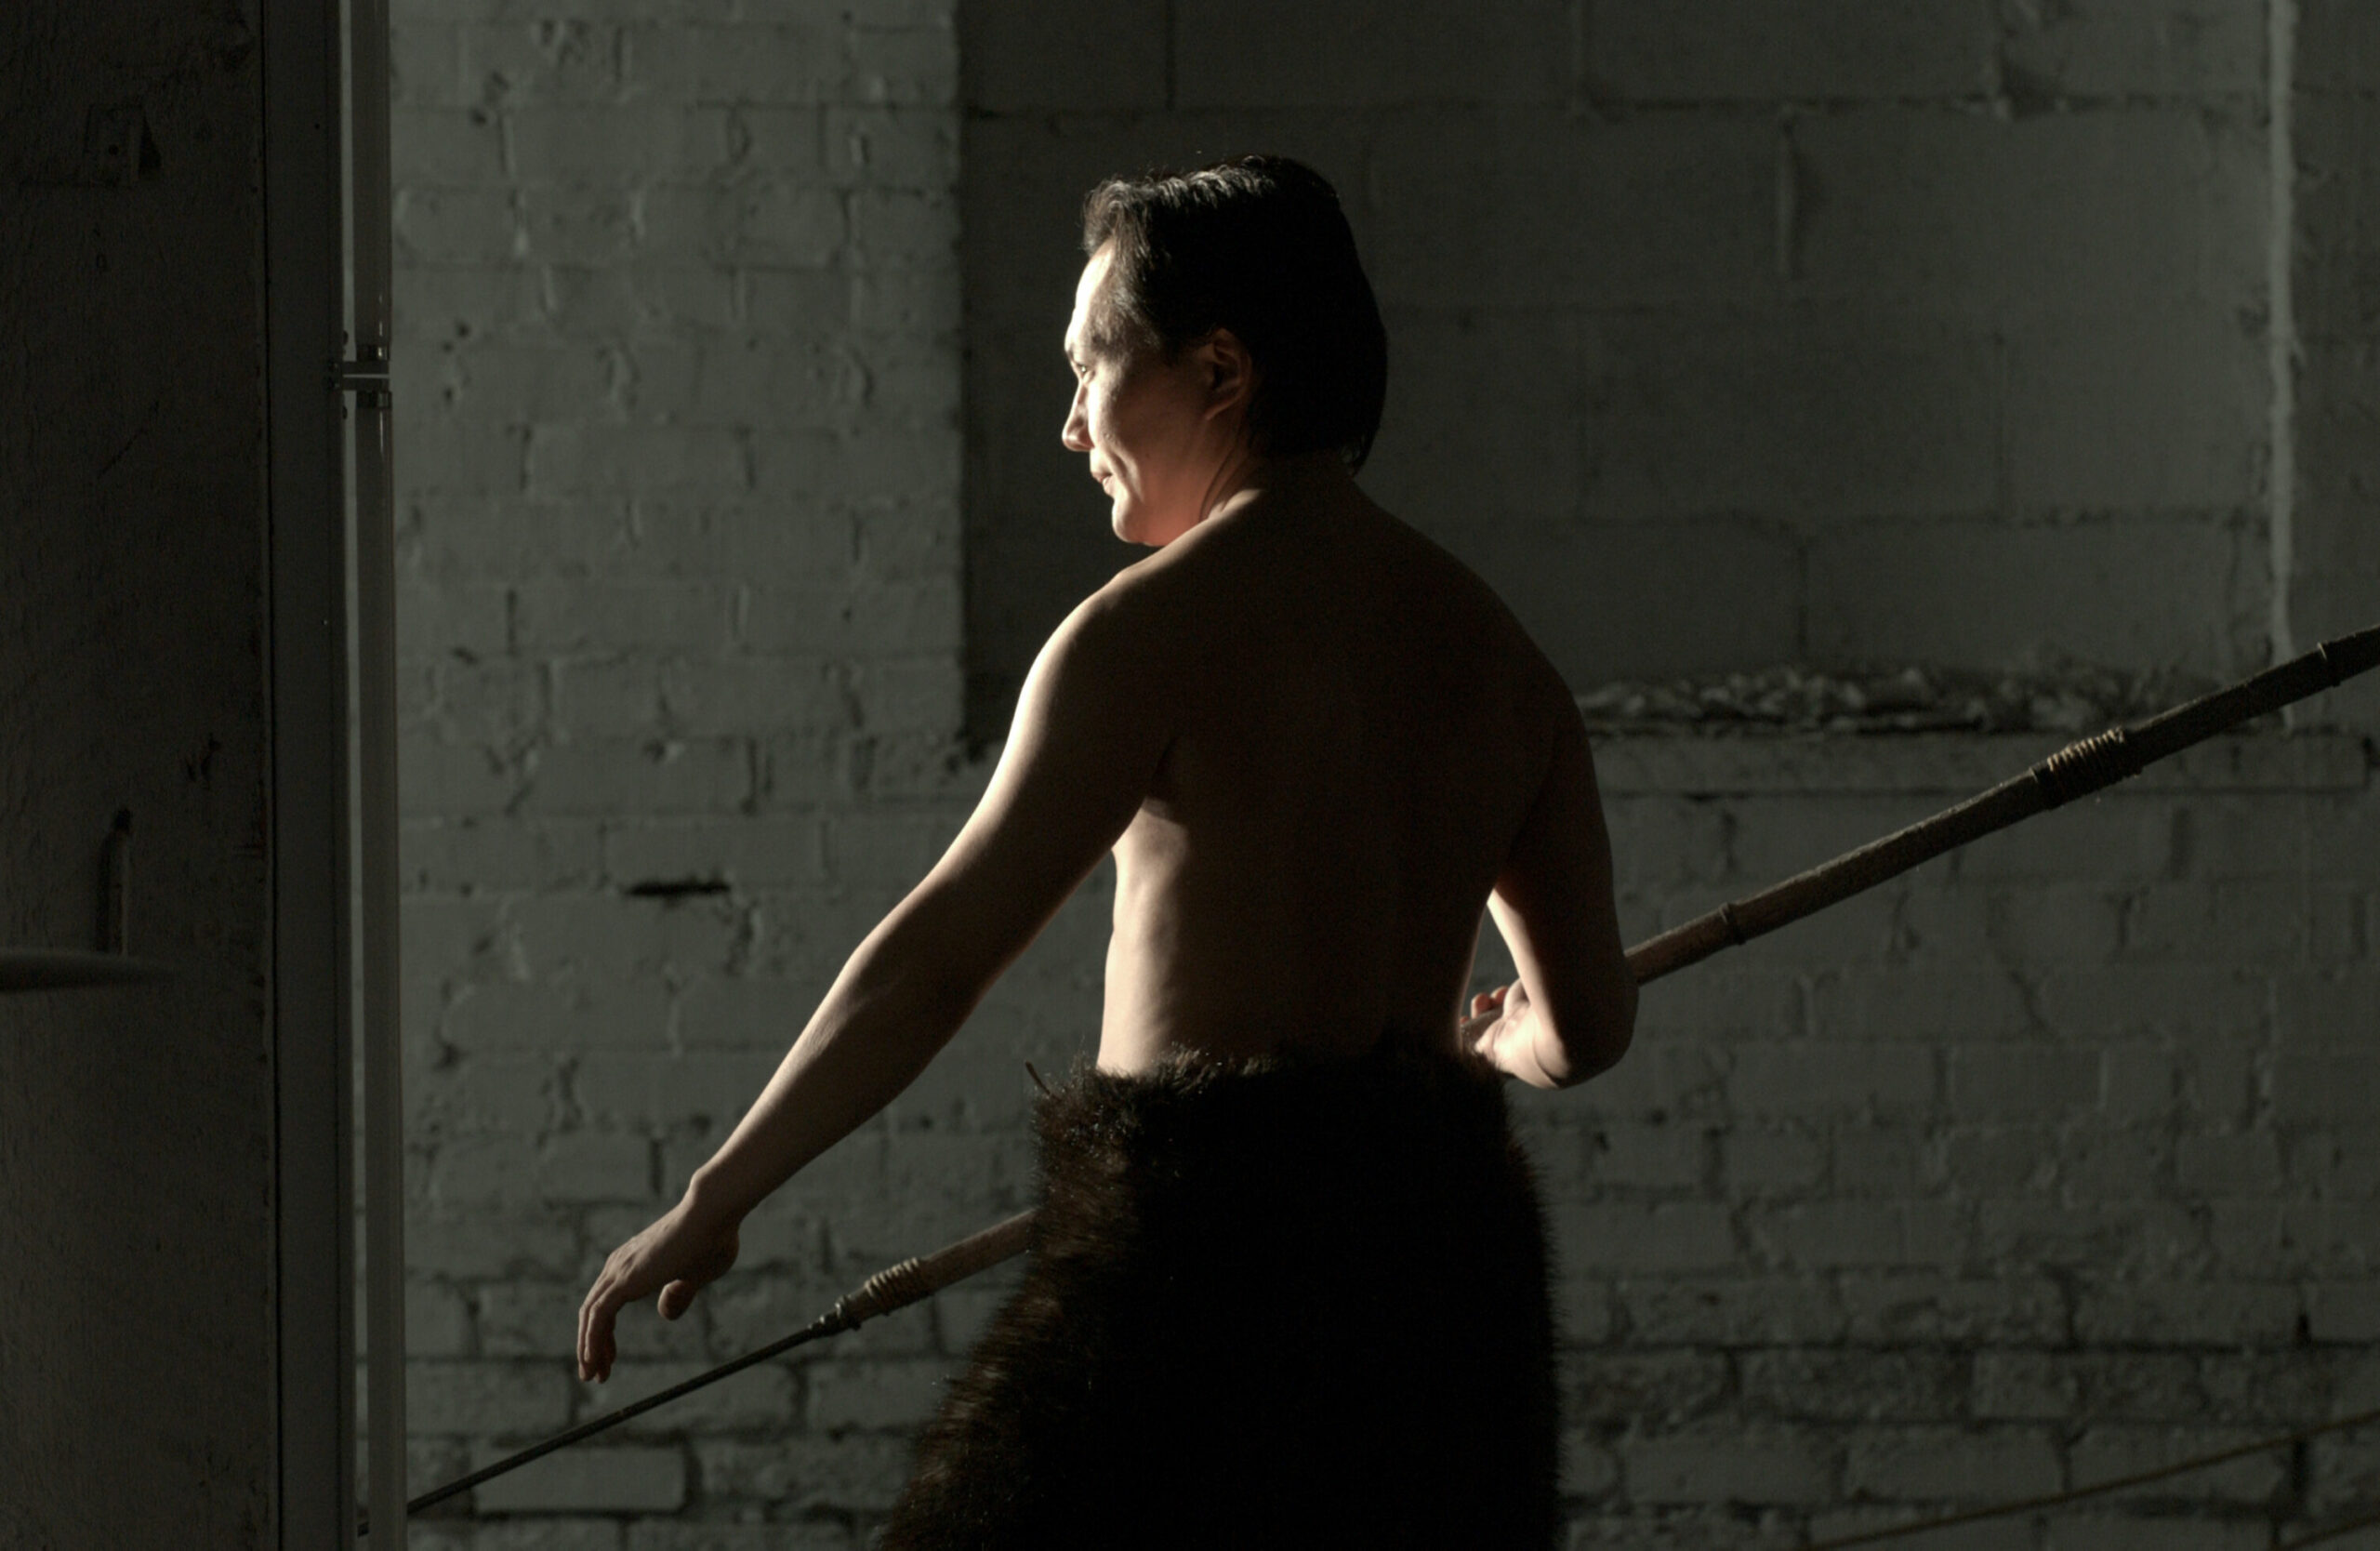 A man stands, lit from behind, mostly in shadow. He is shirtless, wearing bulky black trousers and carrying a spear in one hand.